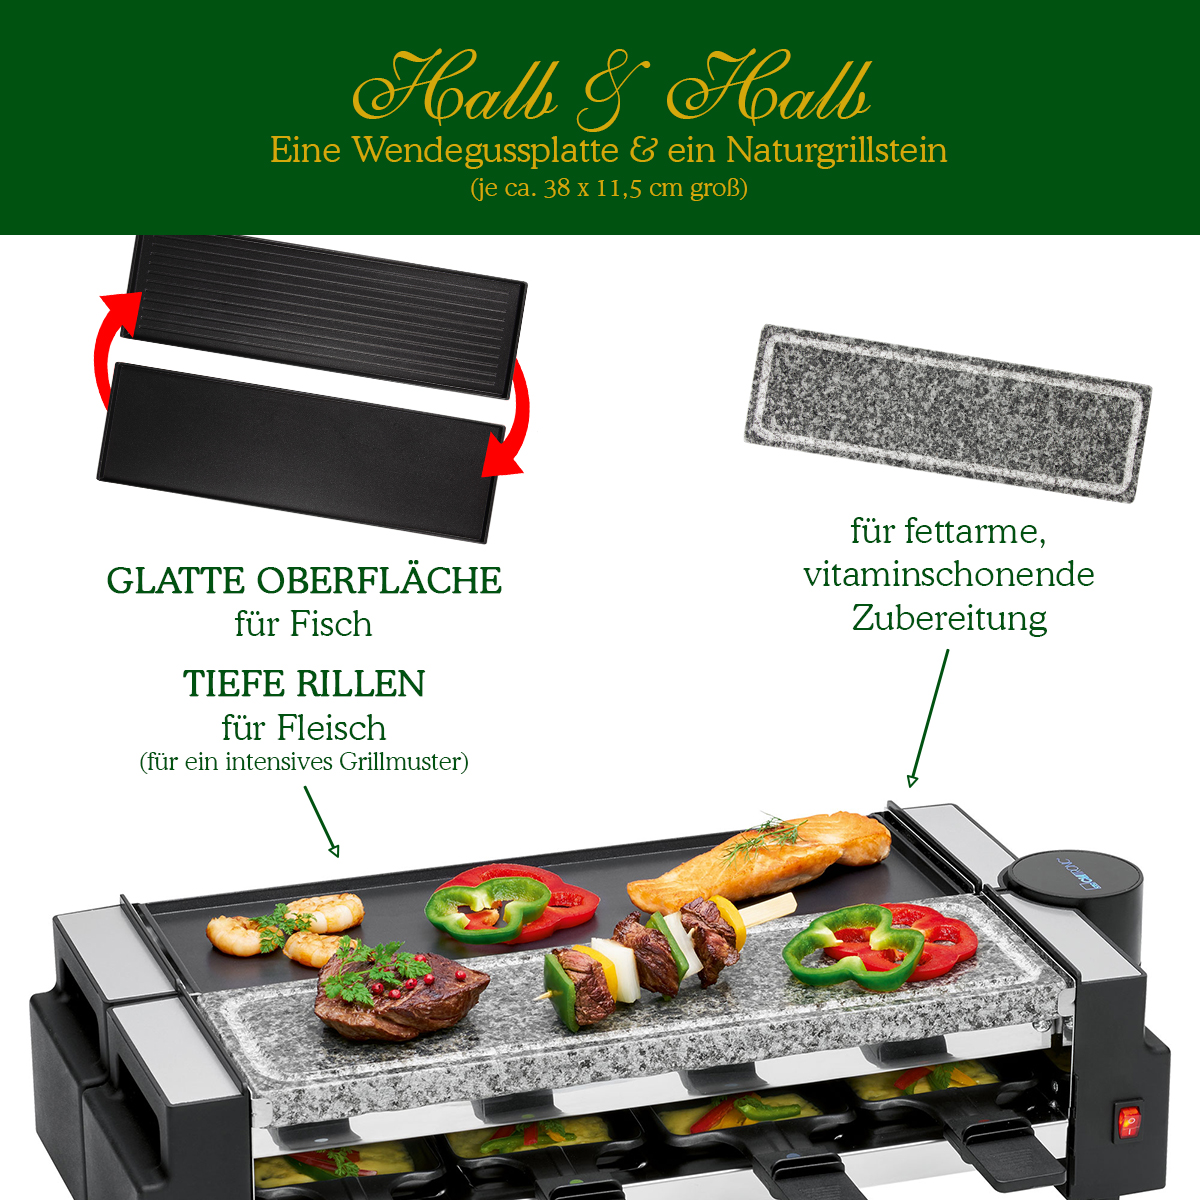 CLATRONIC RG 3678 Raclette-Grill